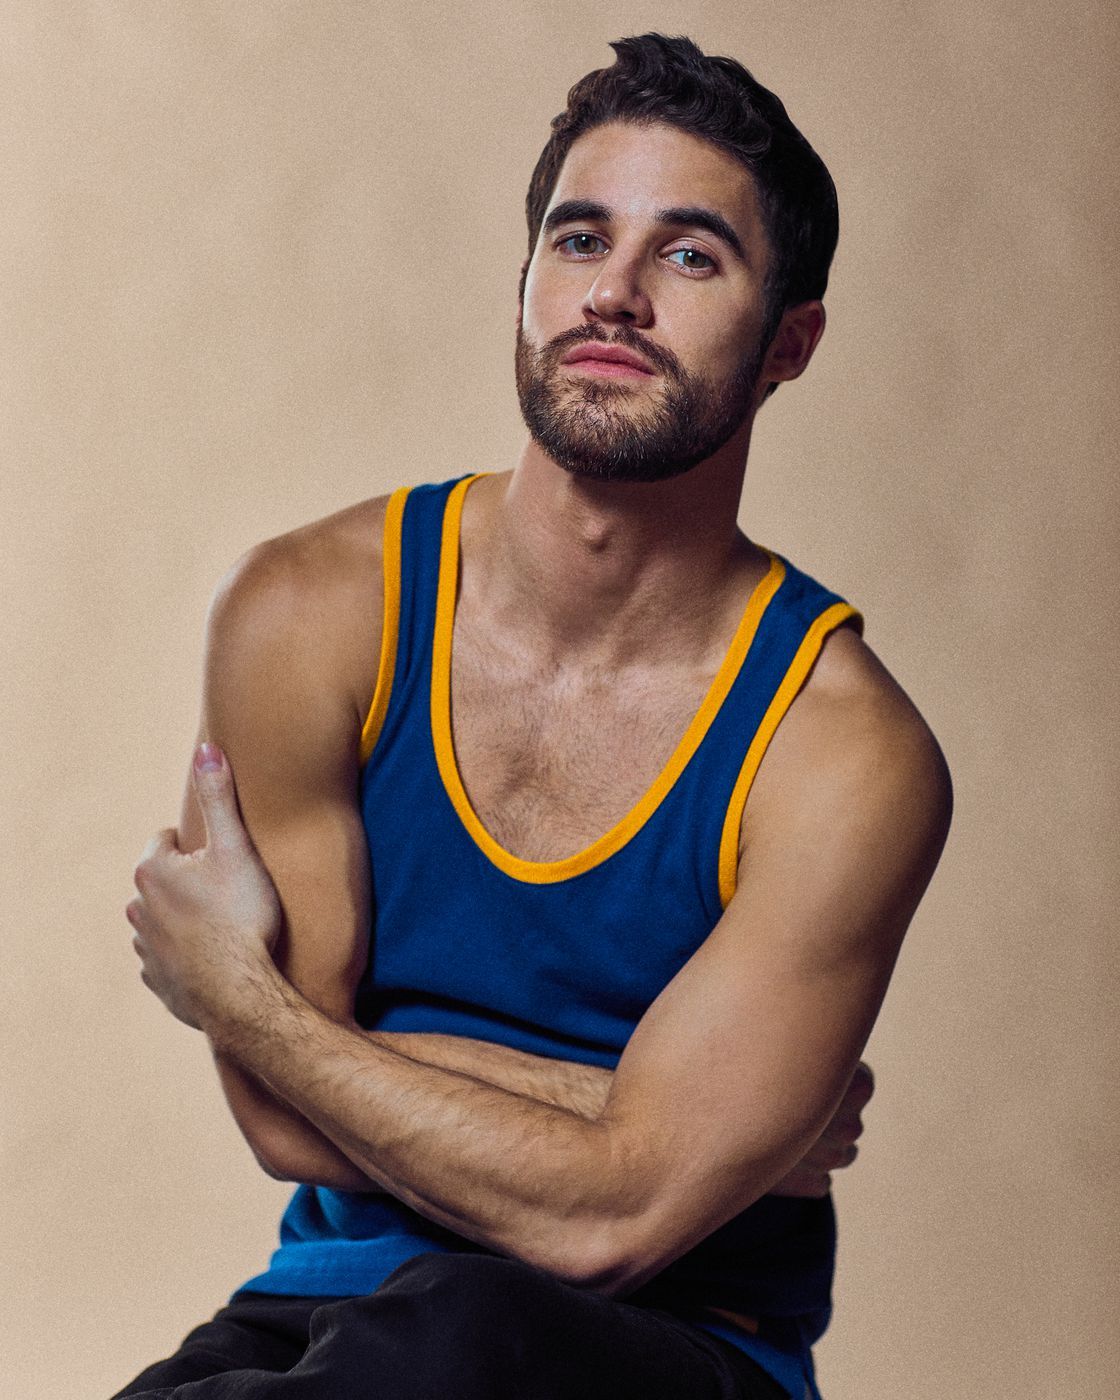 darrencriss - The Assassination of Gianni Versace:  American Crime Story - Page 17 Tumblr_p3tdm0xnuo1wpi2k2o5_1280